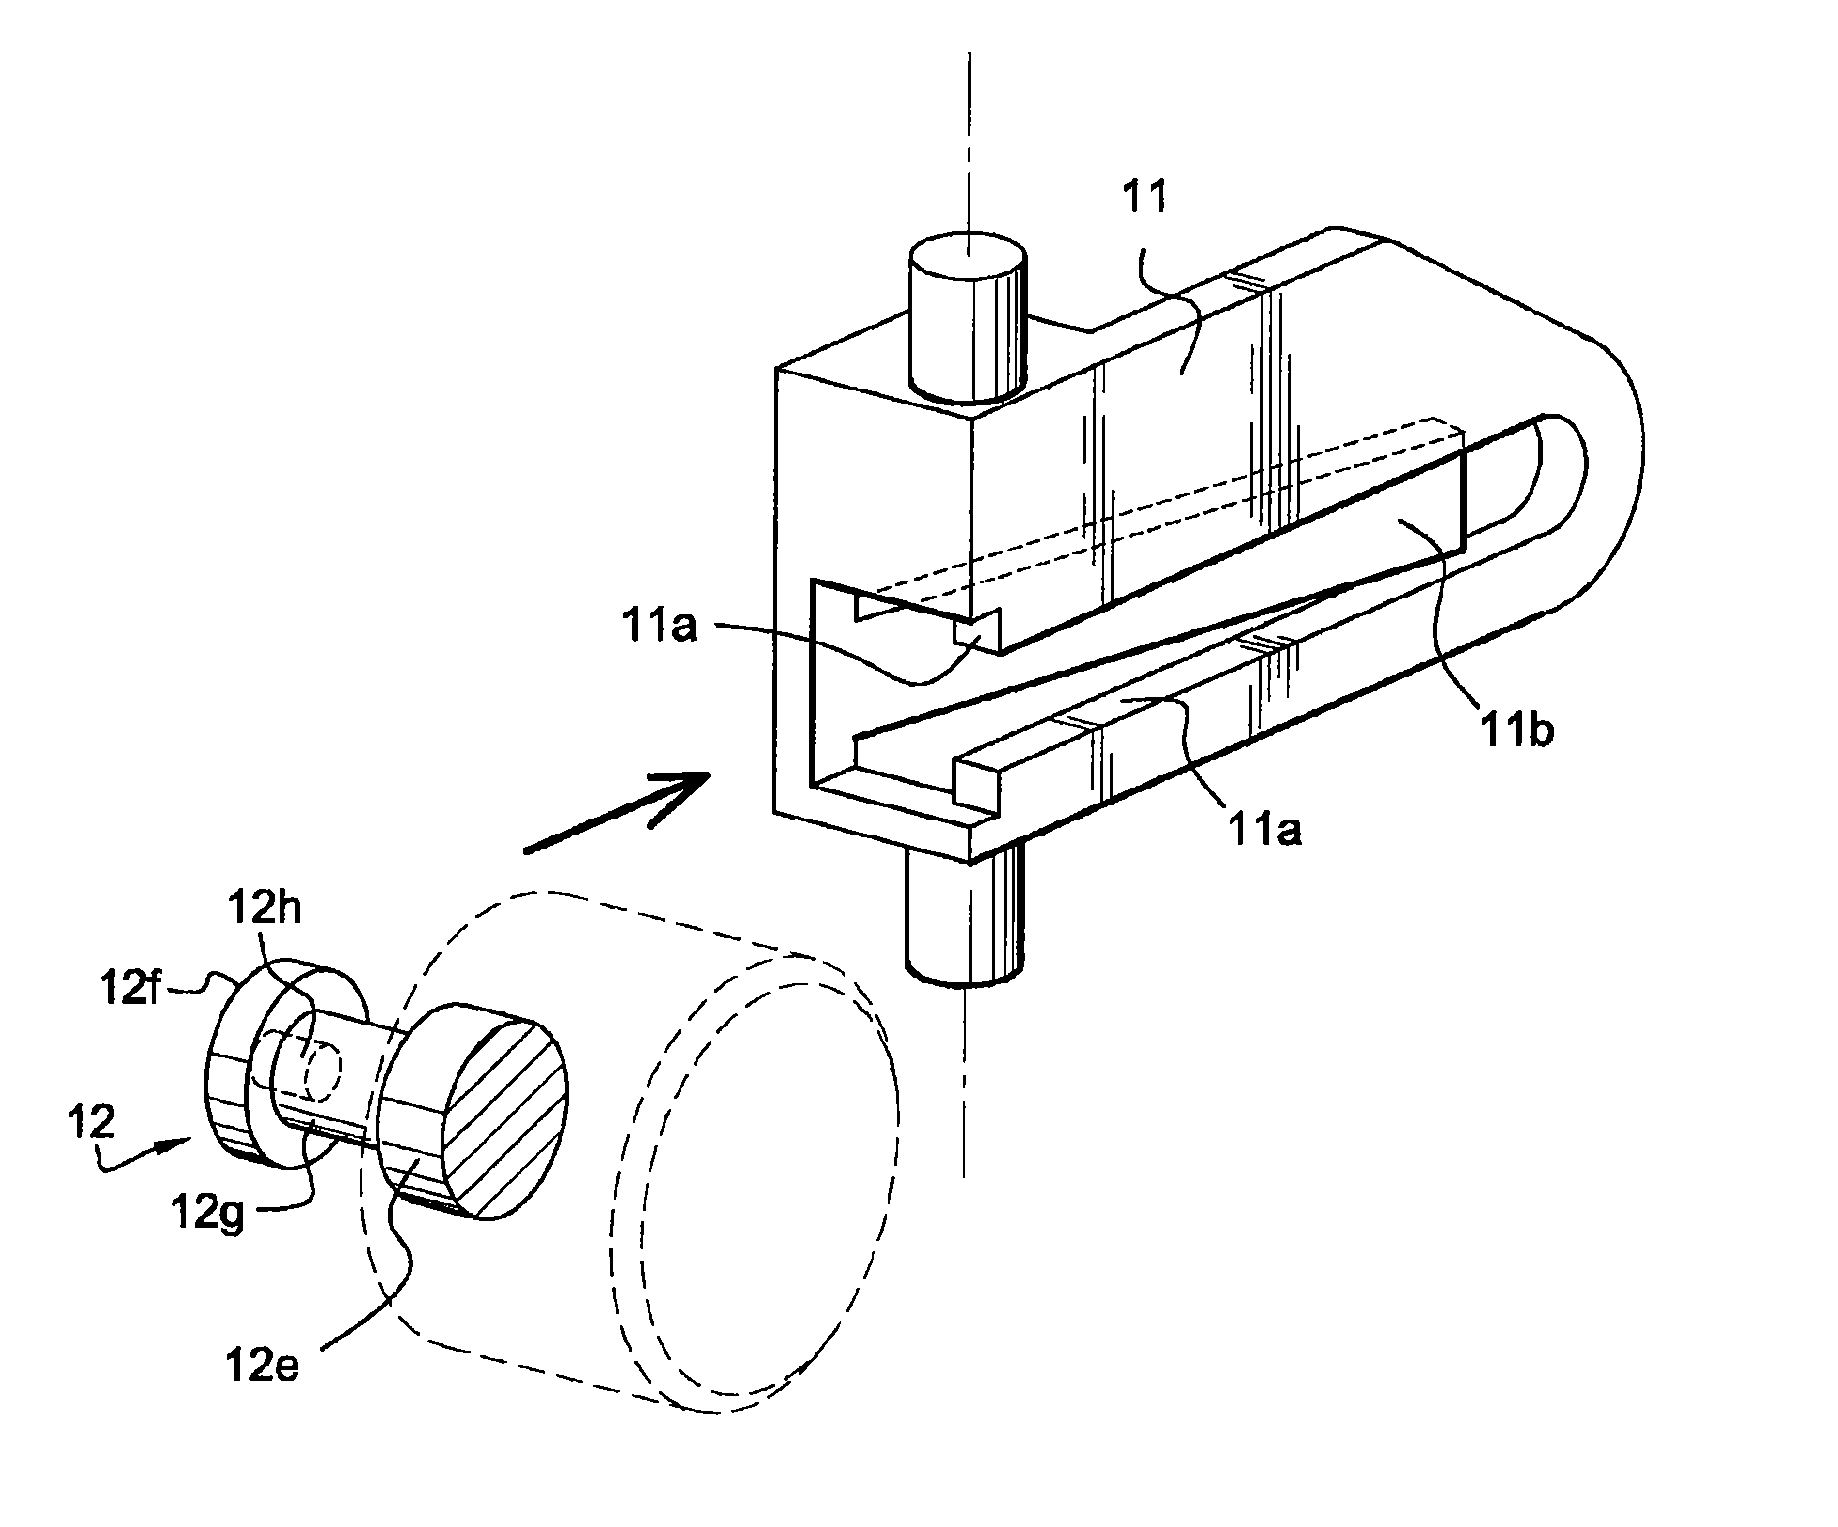 Disposable end piece for a roll of wiping material and apparatus for dispensing wiping material using one such end piece